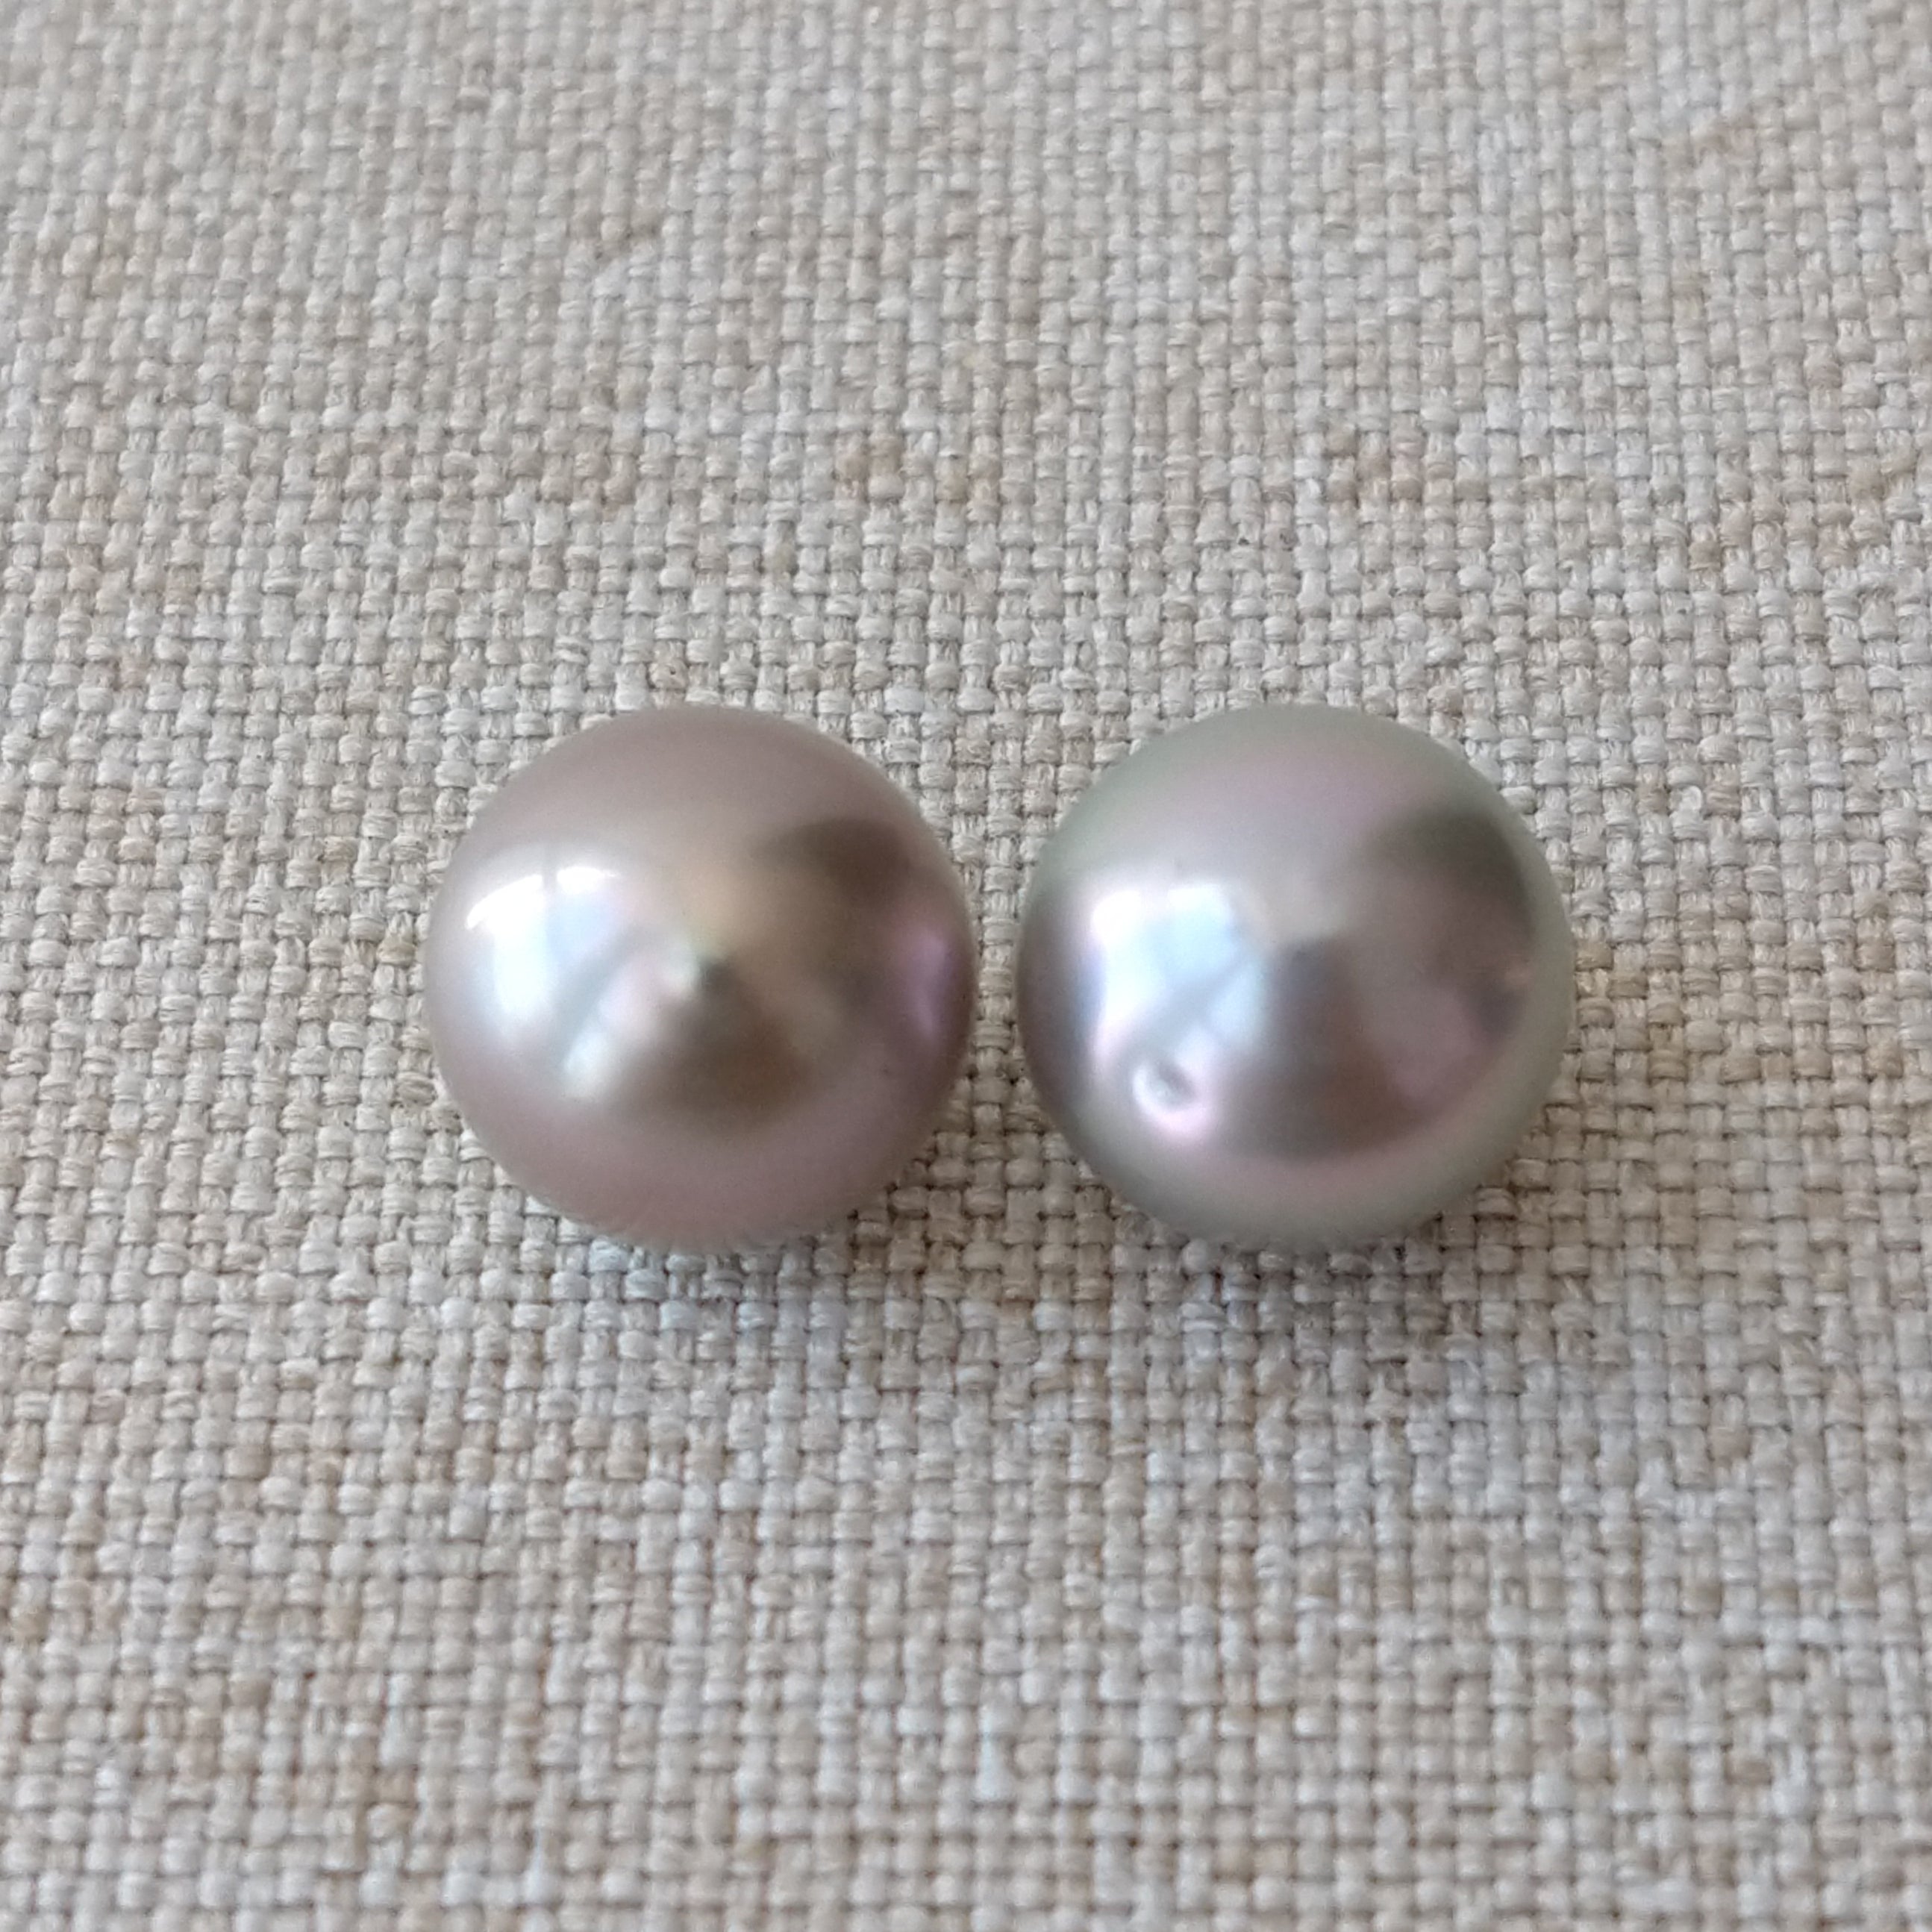 Pair of "Button" 9 mm Cortez Pearls